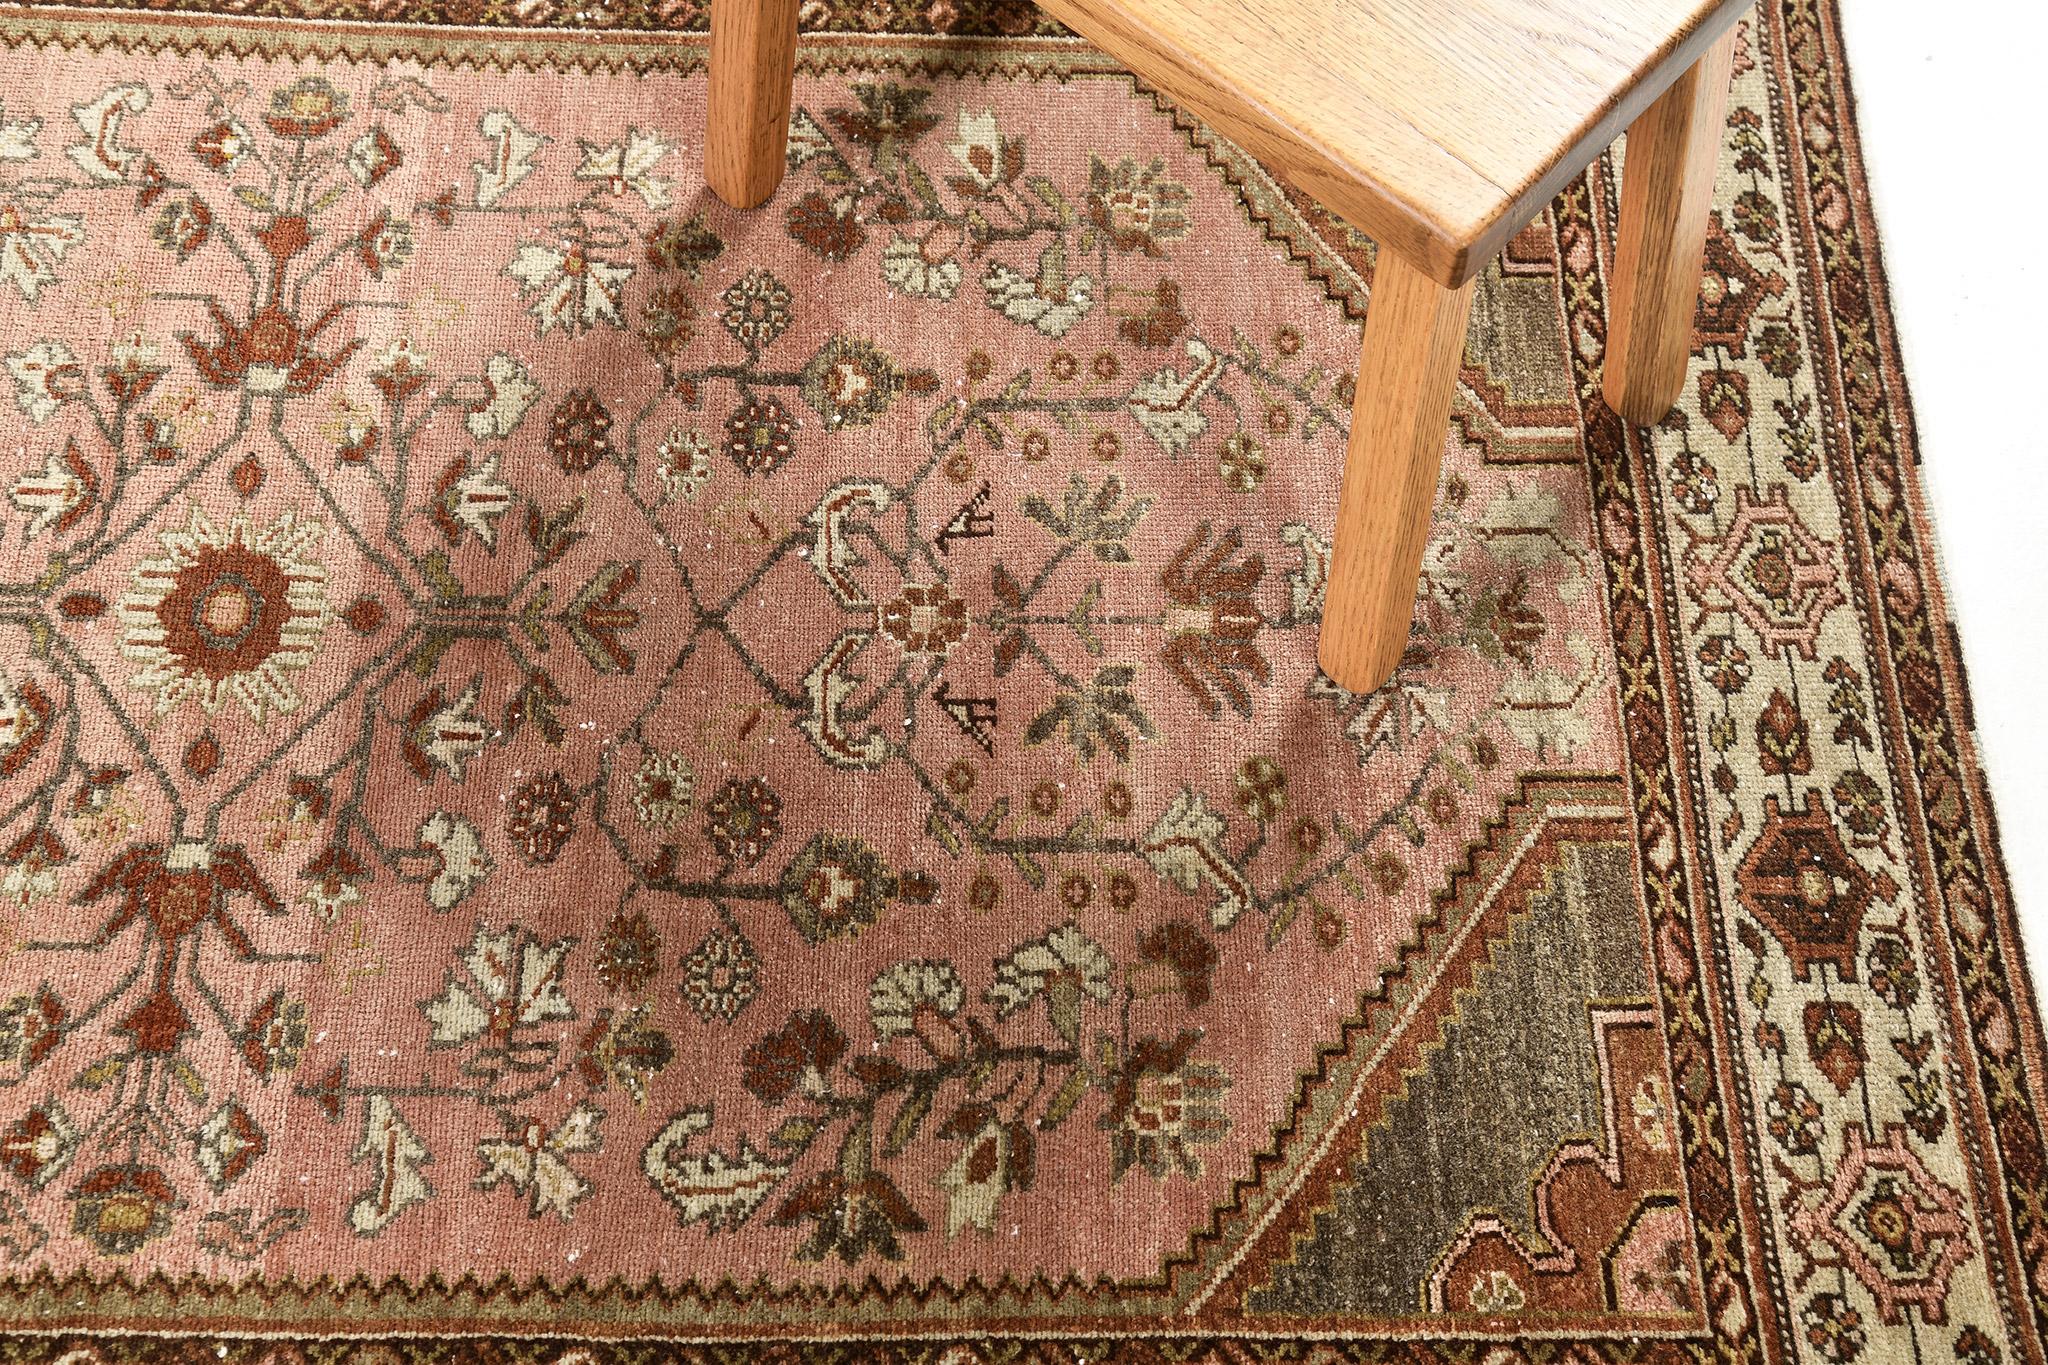 A gracefully composed Antique Persian Malayer rug that is a majestic illustration of class, soft beauty and serenity. Distinctive Herati motifs, palmettes, stylized florals, serrated leaves and florid patterns are showcasing captivating